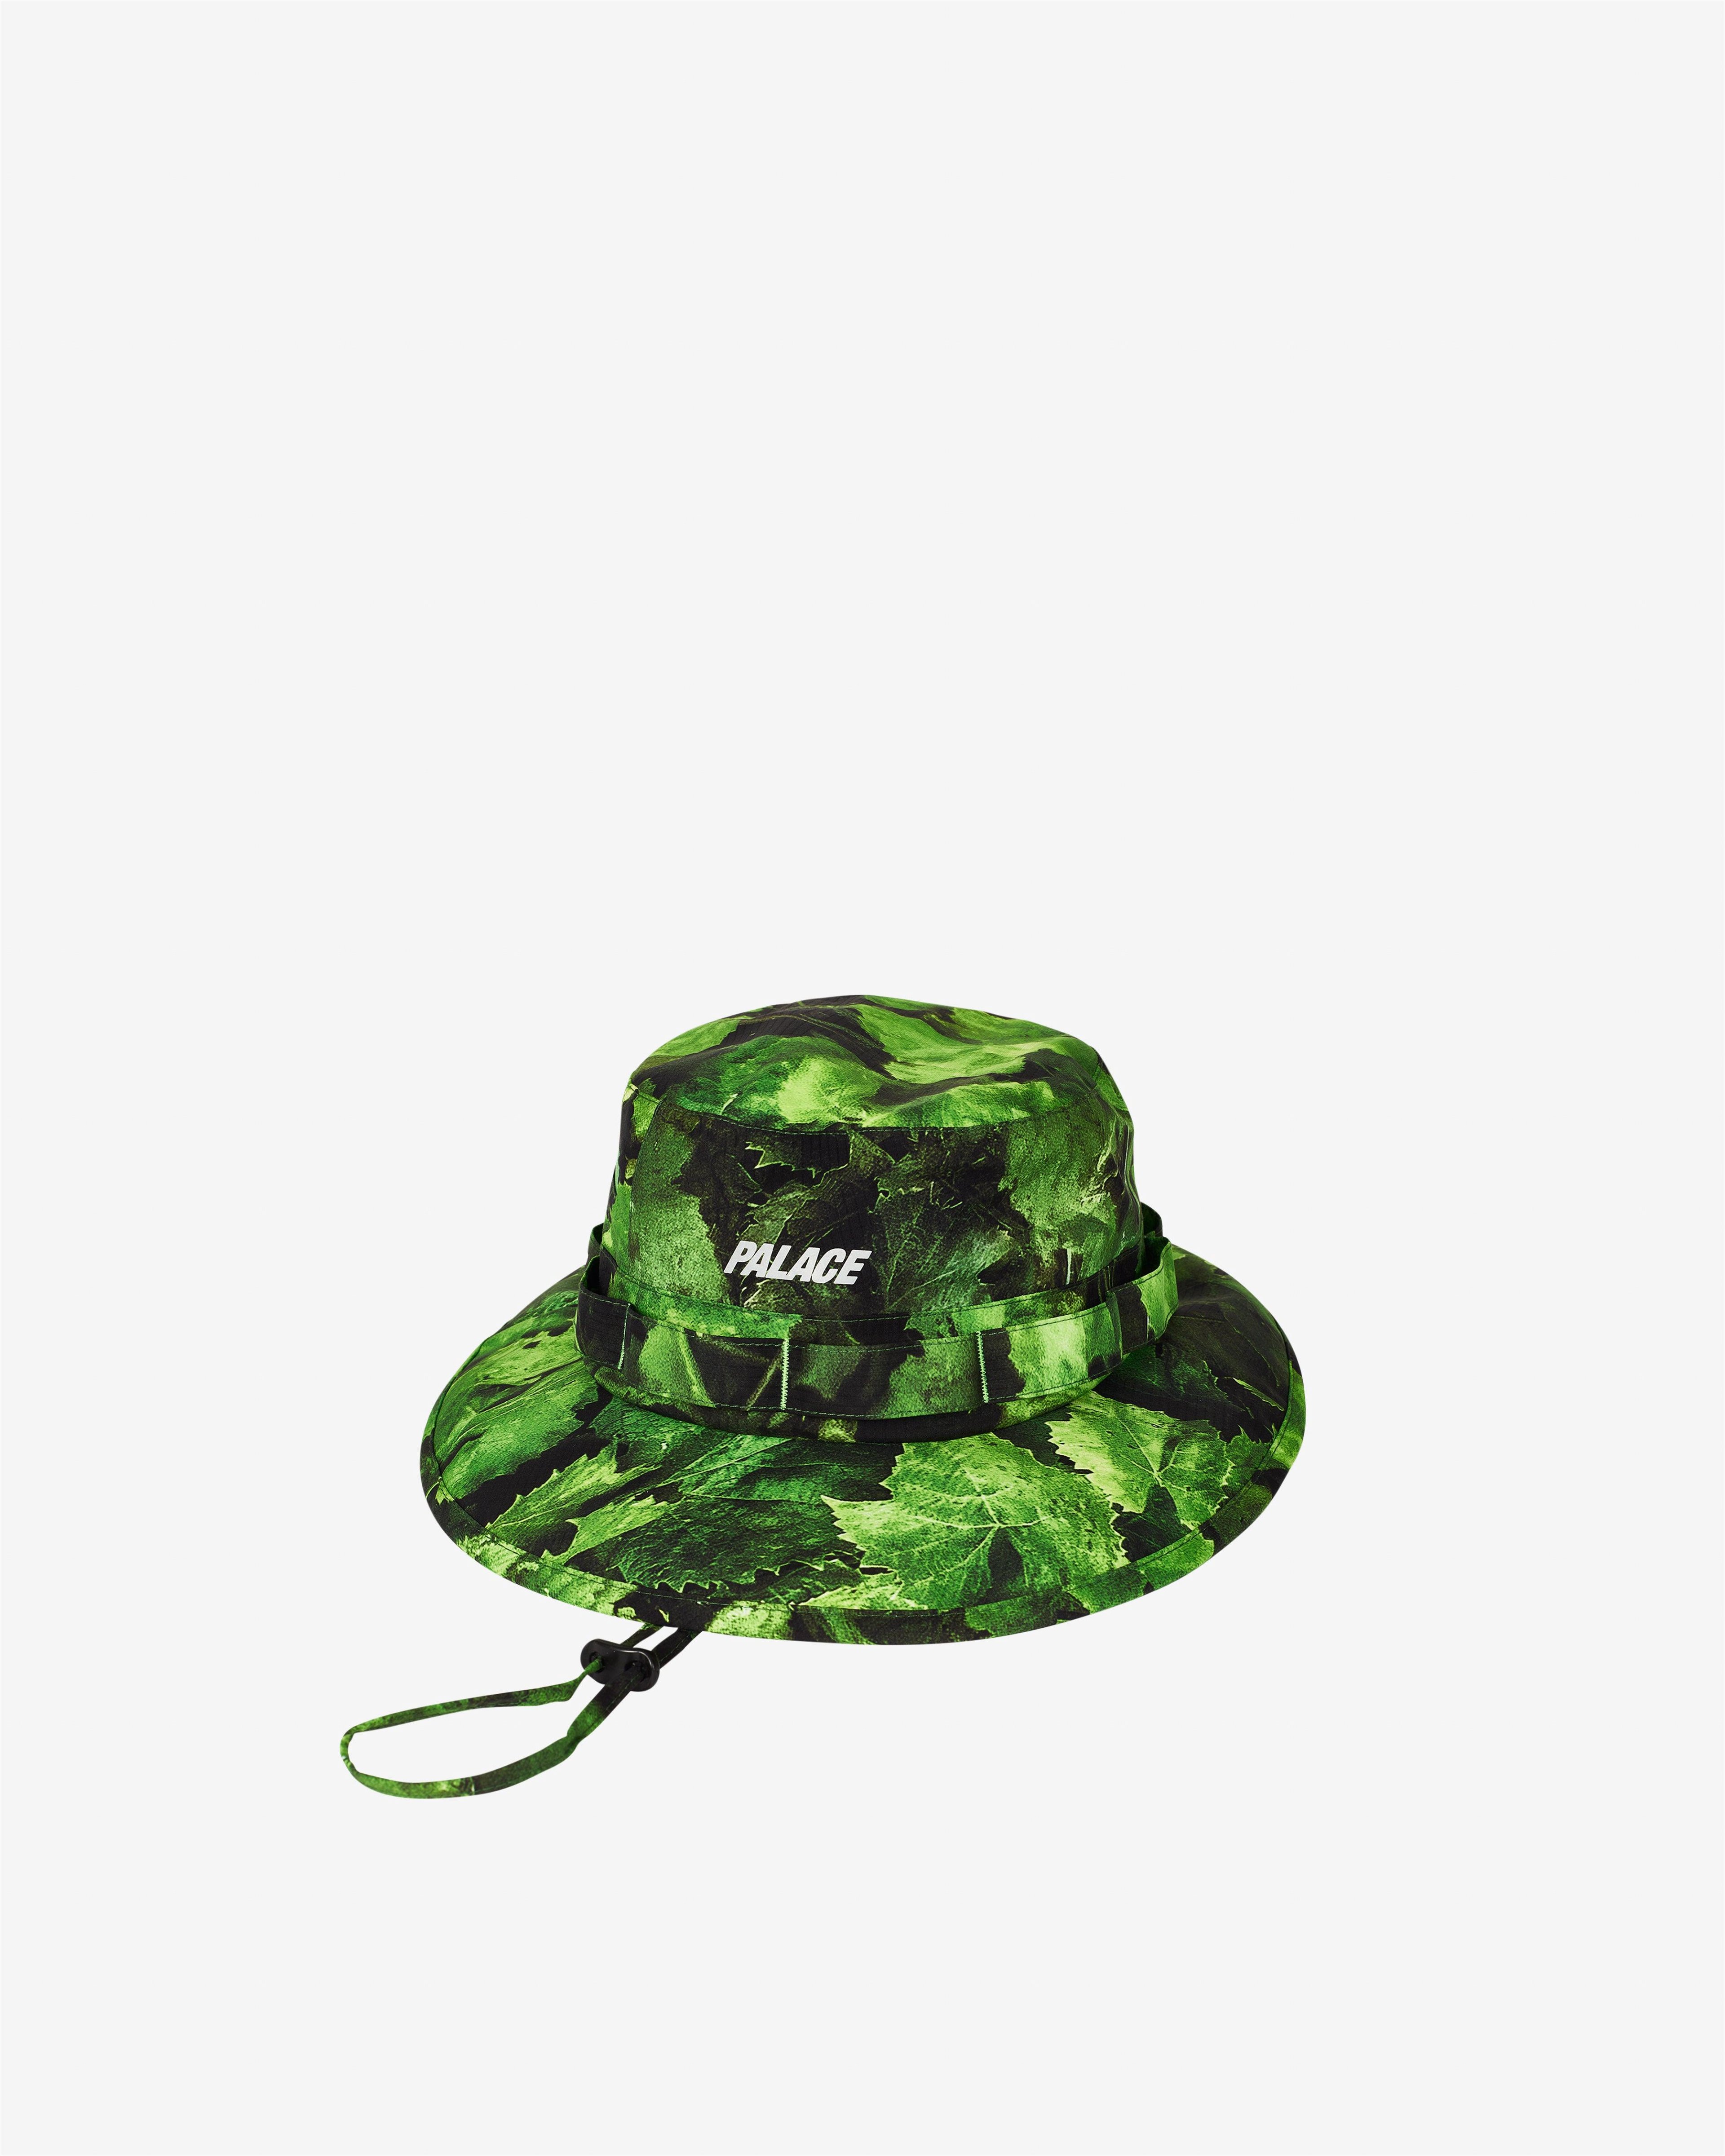 Palace - Men's Pertex® 3L Armor Boonie - (Leaf Print) by PALACE